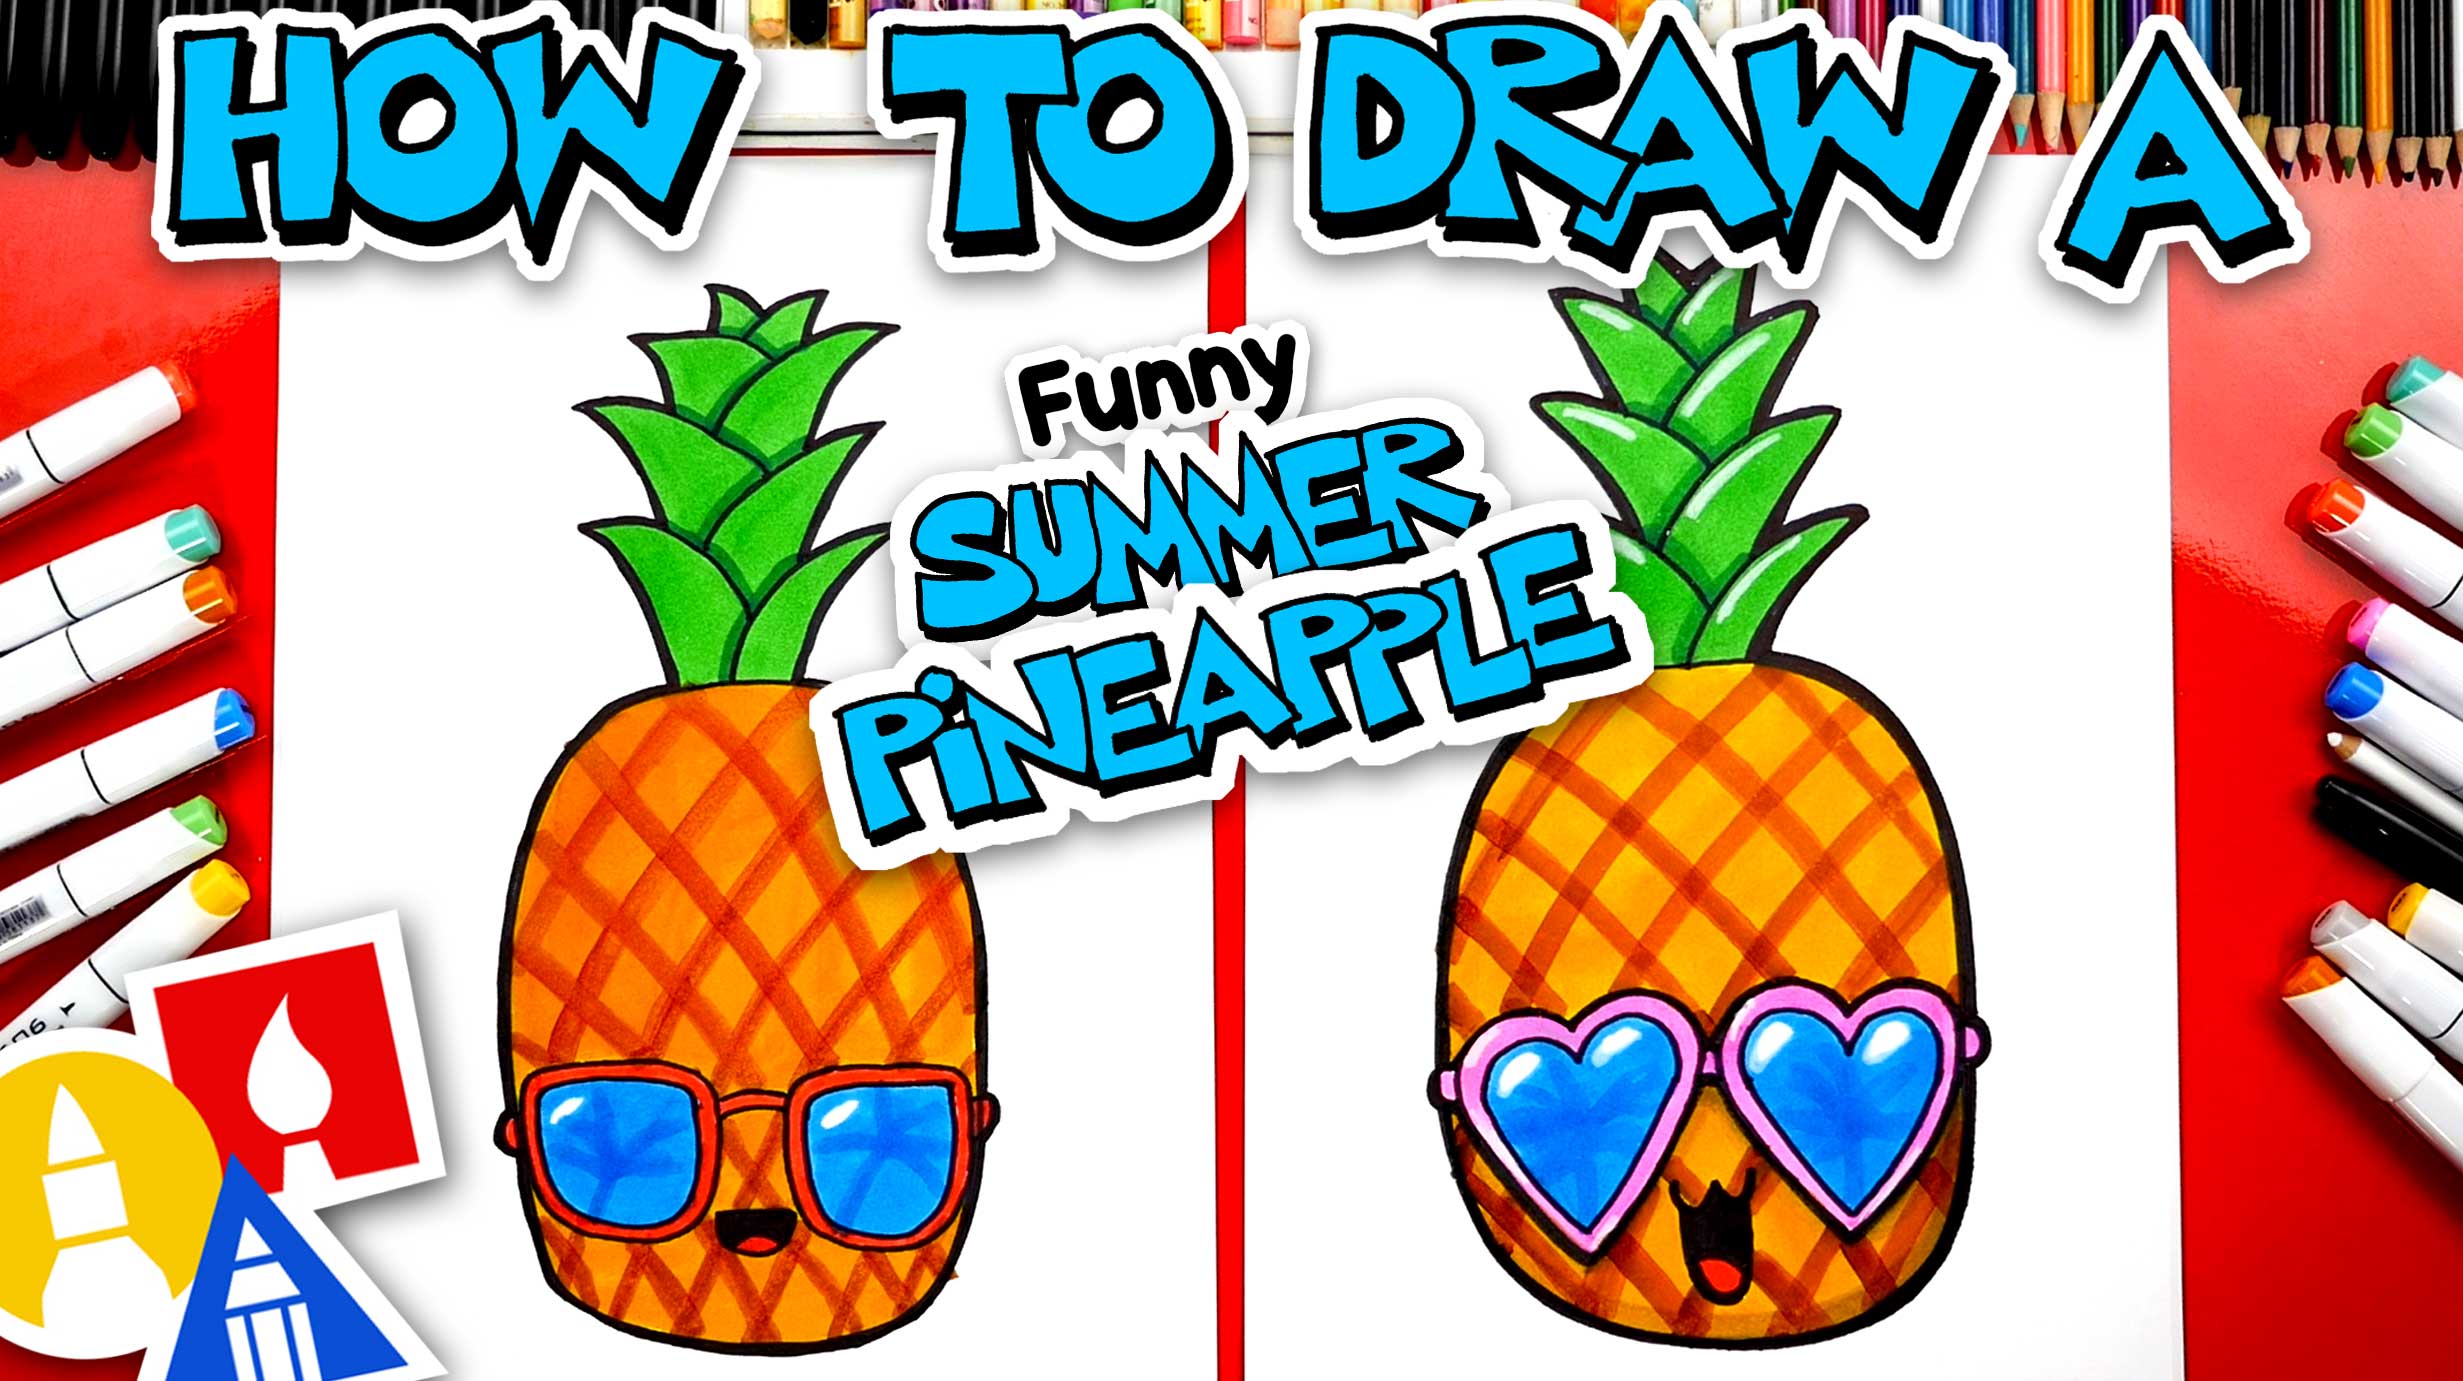 How To Draw A Funny Summer Pineapple - Art For Kids Hub -